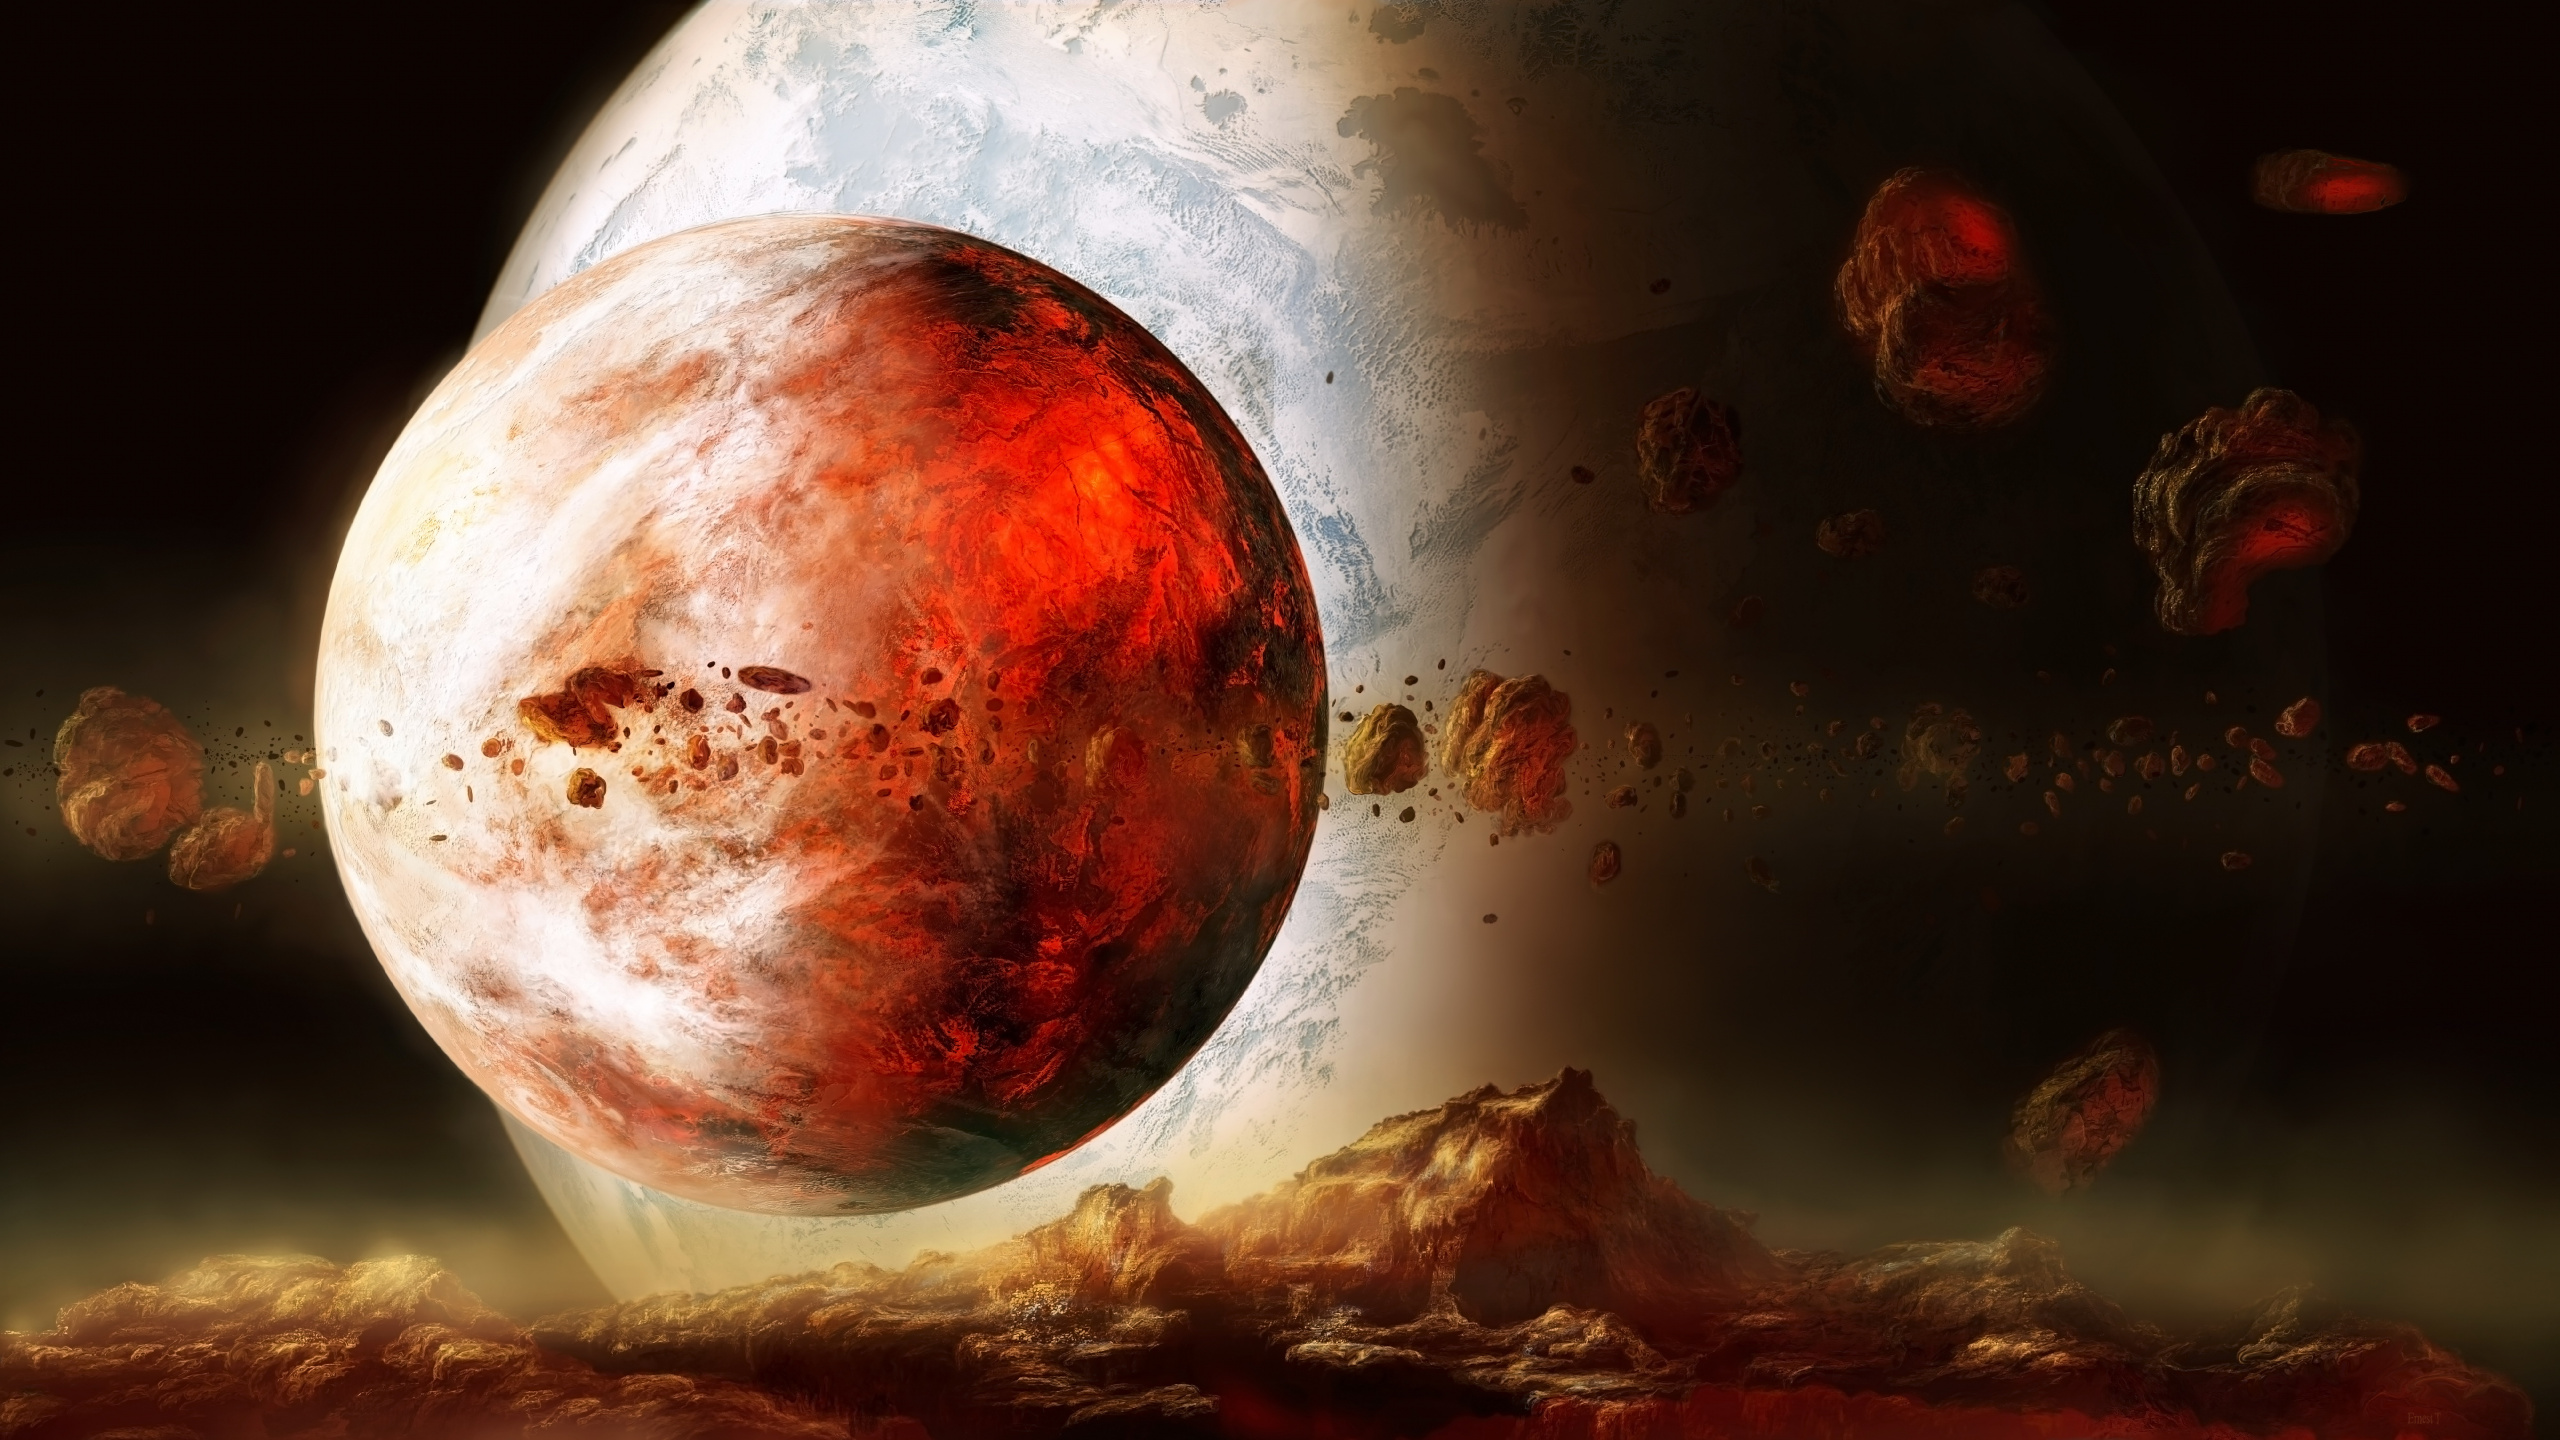 Red and Brown Moon Painting. Wallpaper in 2560x1440 Resolution